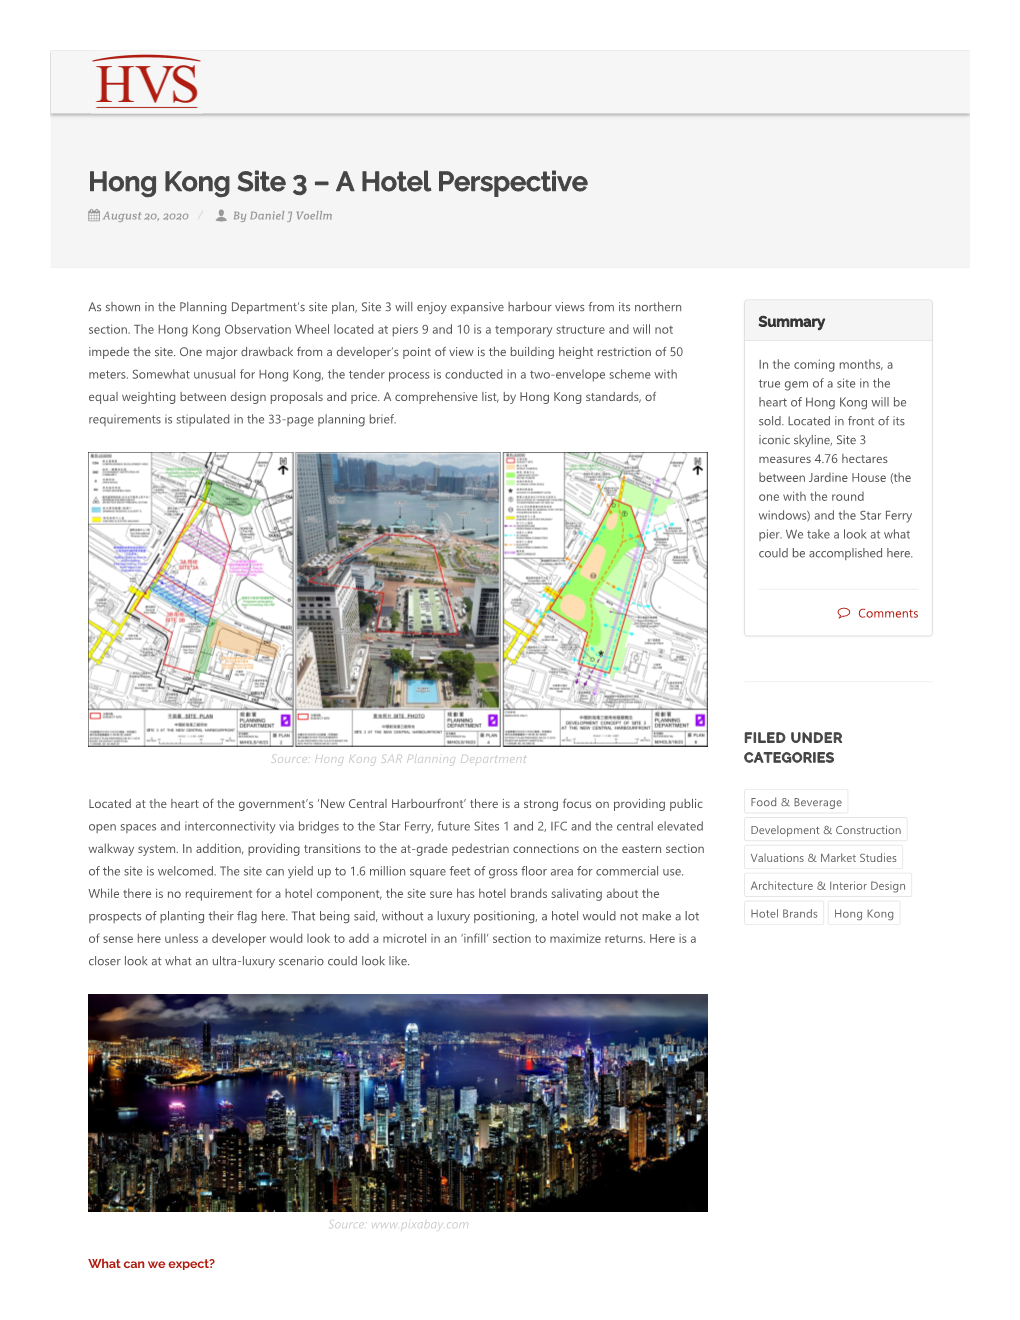 Hong Kong Site 3 – a Hotel Perspective